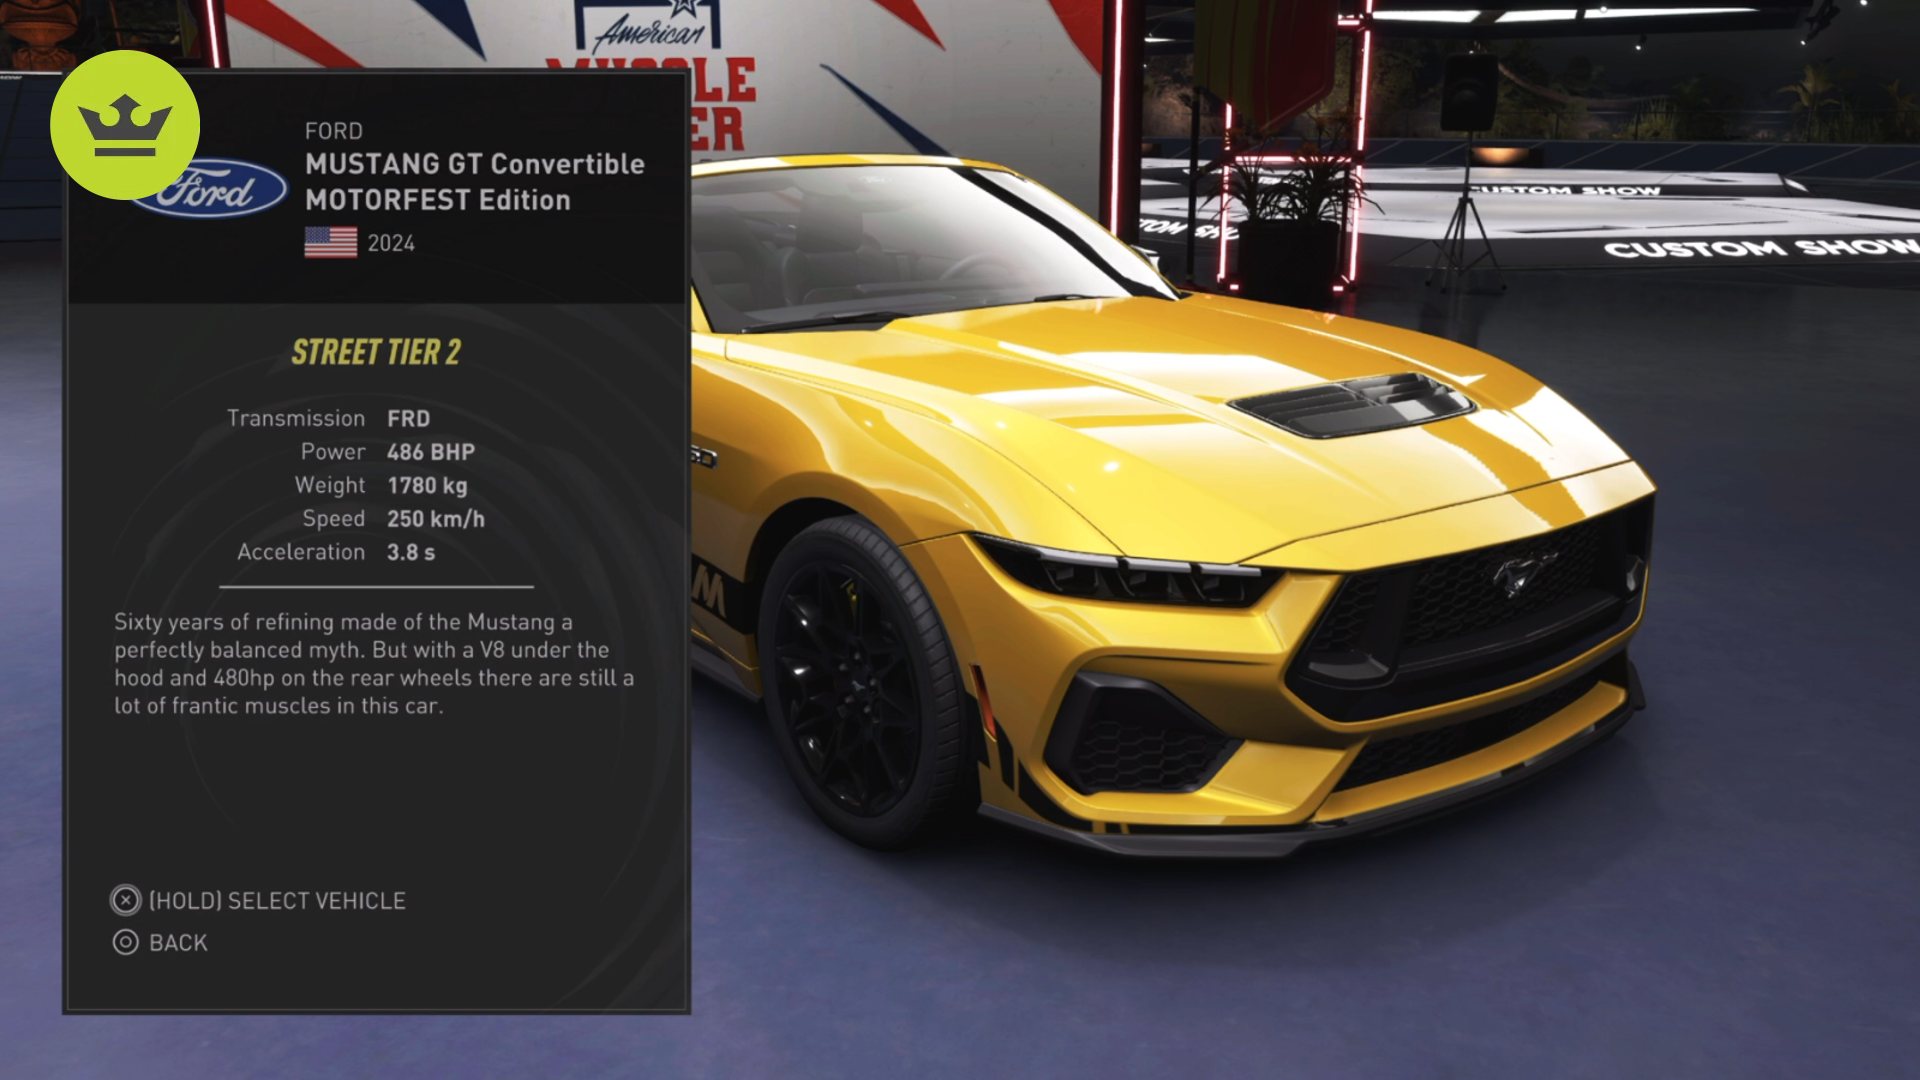 The Crew Motorfest Ultimate Guide: Review, car list, map, editions